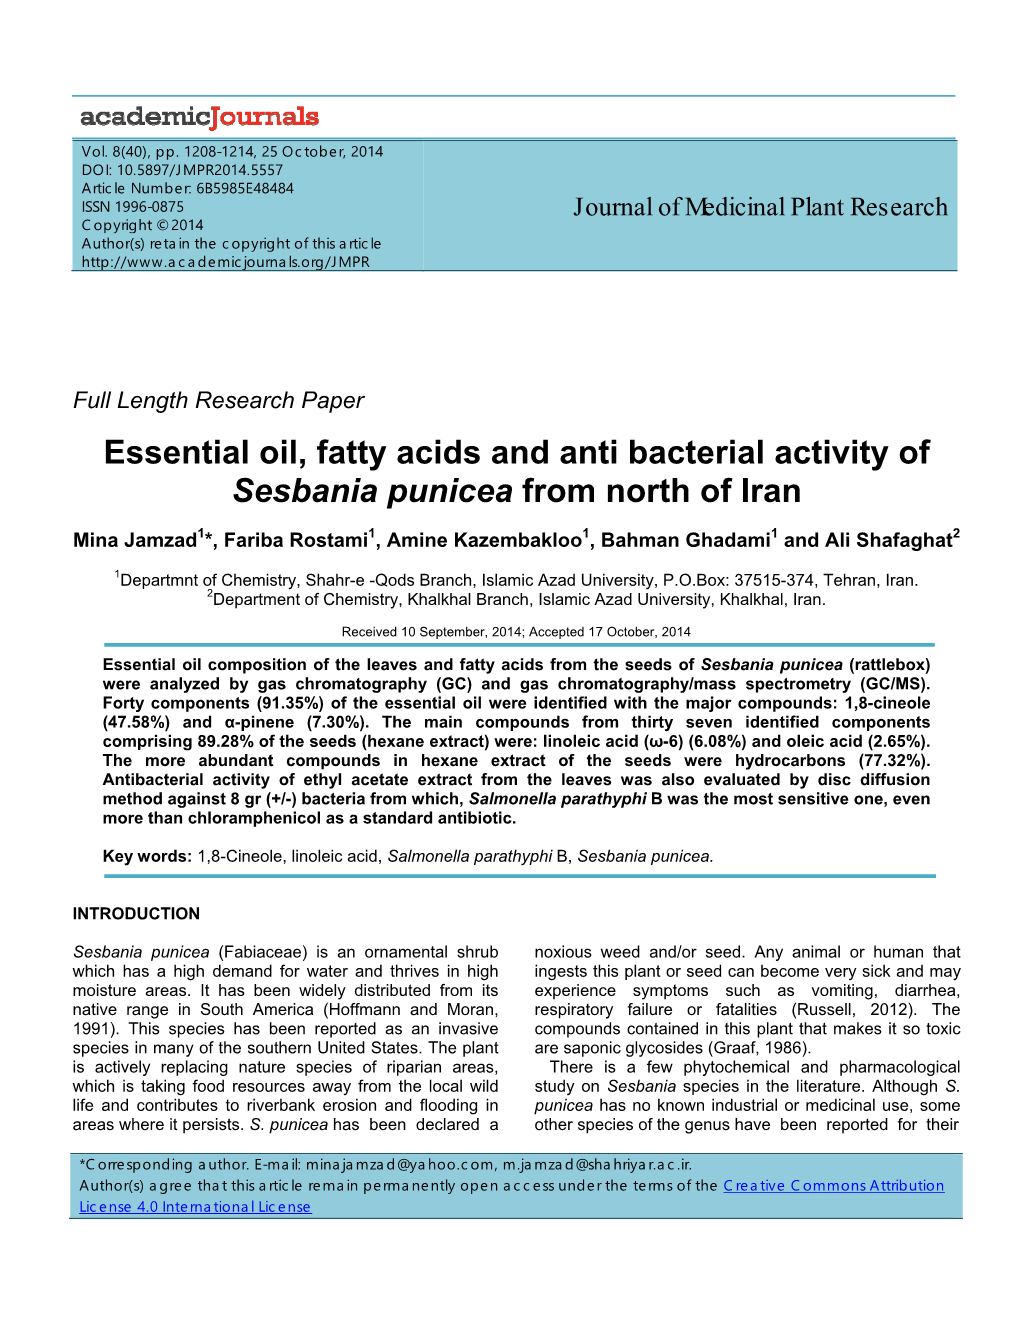 Essential Oil, Fatty Acids and Anti Bacterial Activity of Sesbania Punicea from North of Iran